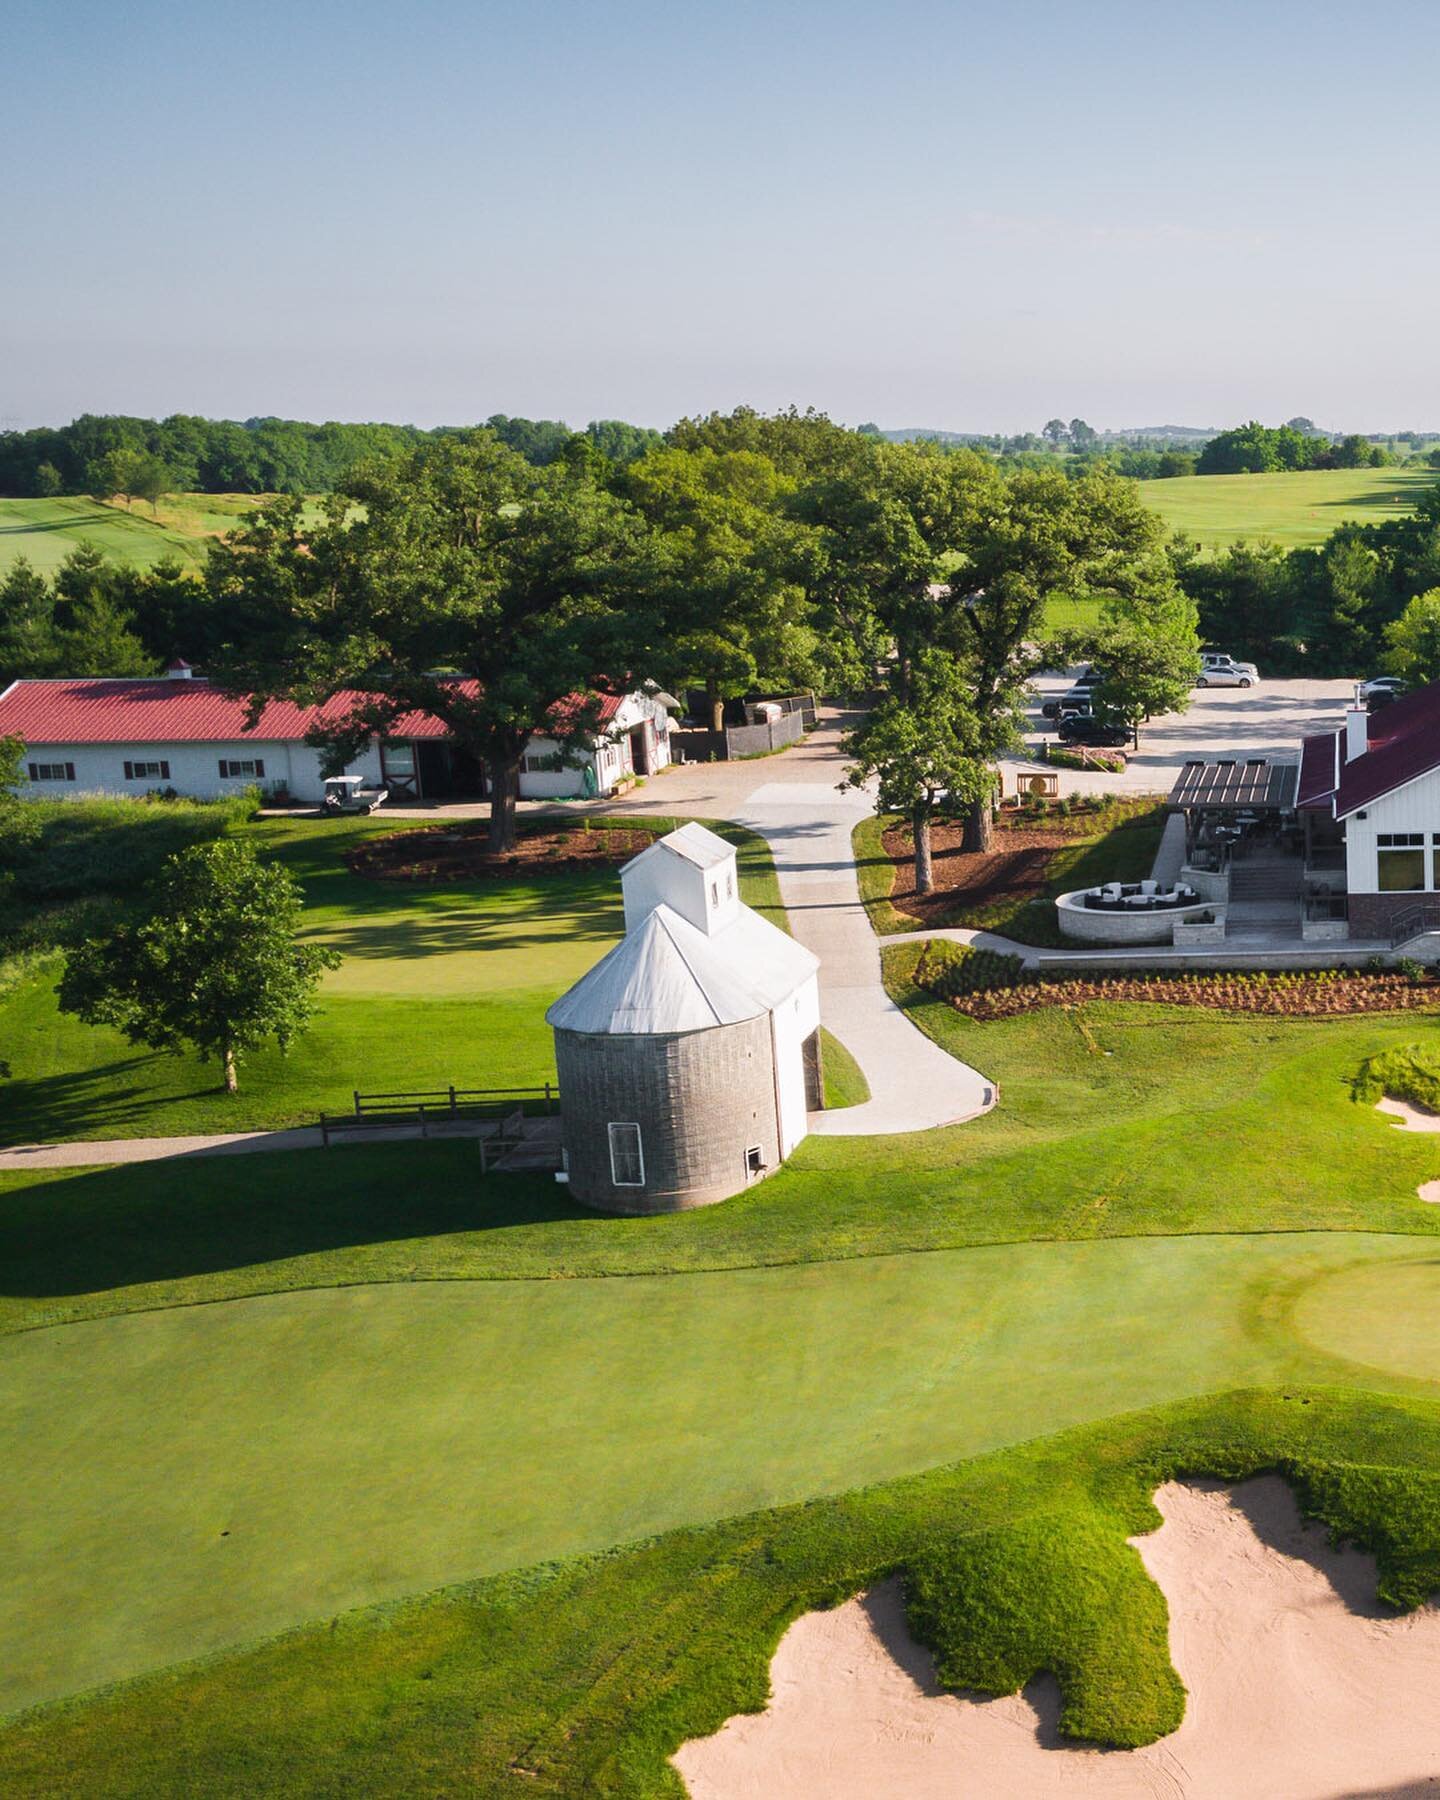 @arborlinks offers its members a true golf retreat that mimics the classic clubs of yesterday. As an exclusive club for golf purists, limited membership ensures premier course conditions and an unhurried atmosphere. Off the course, ArborLinks offers 